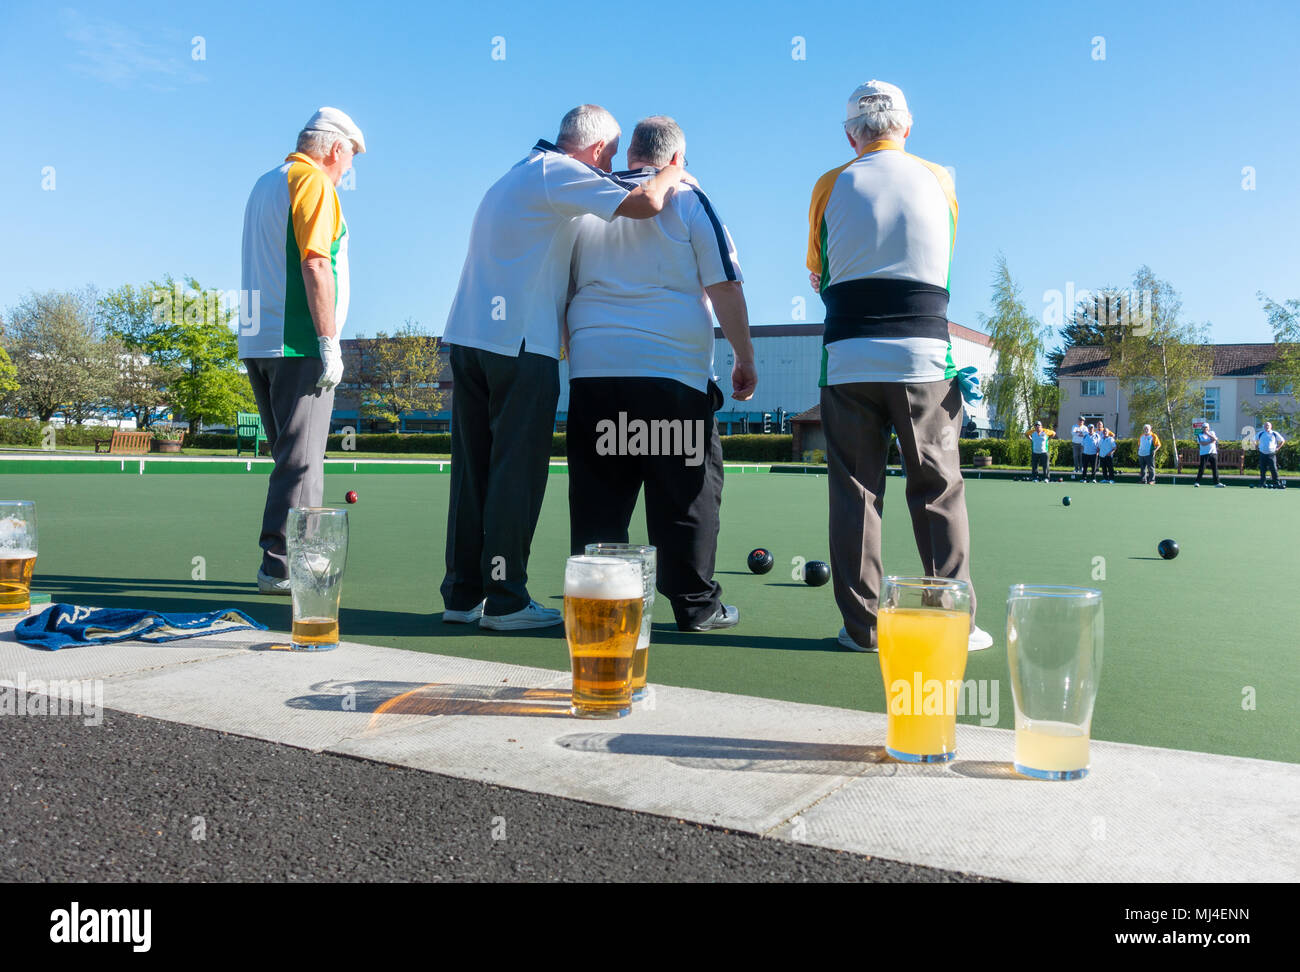 Beer and bowling on a hot day at Billingham, north east England, UK. Stock Photo